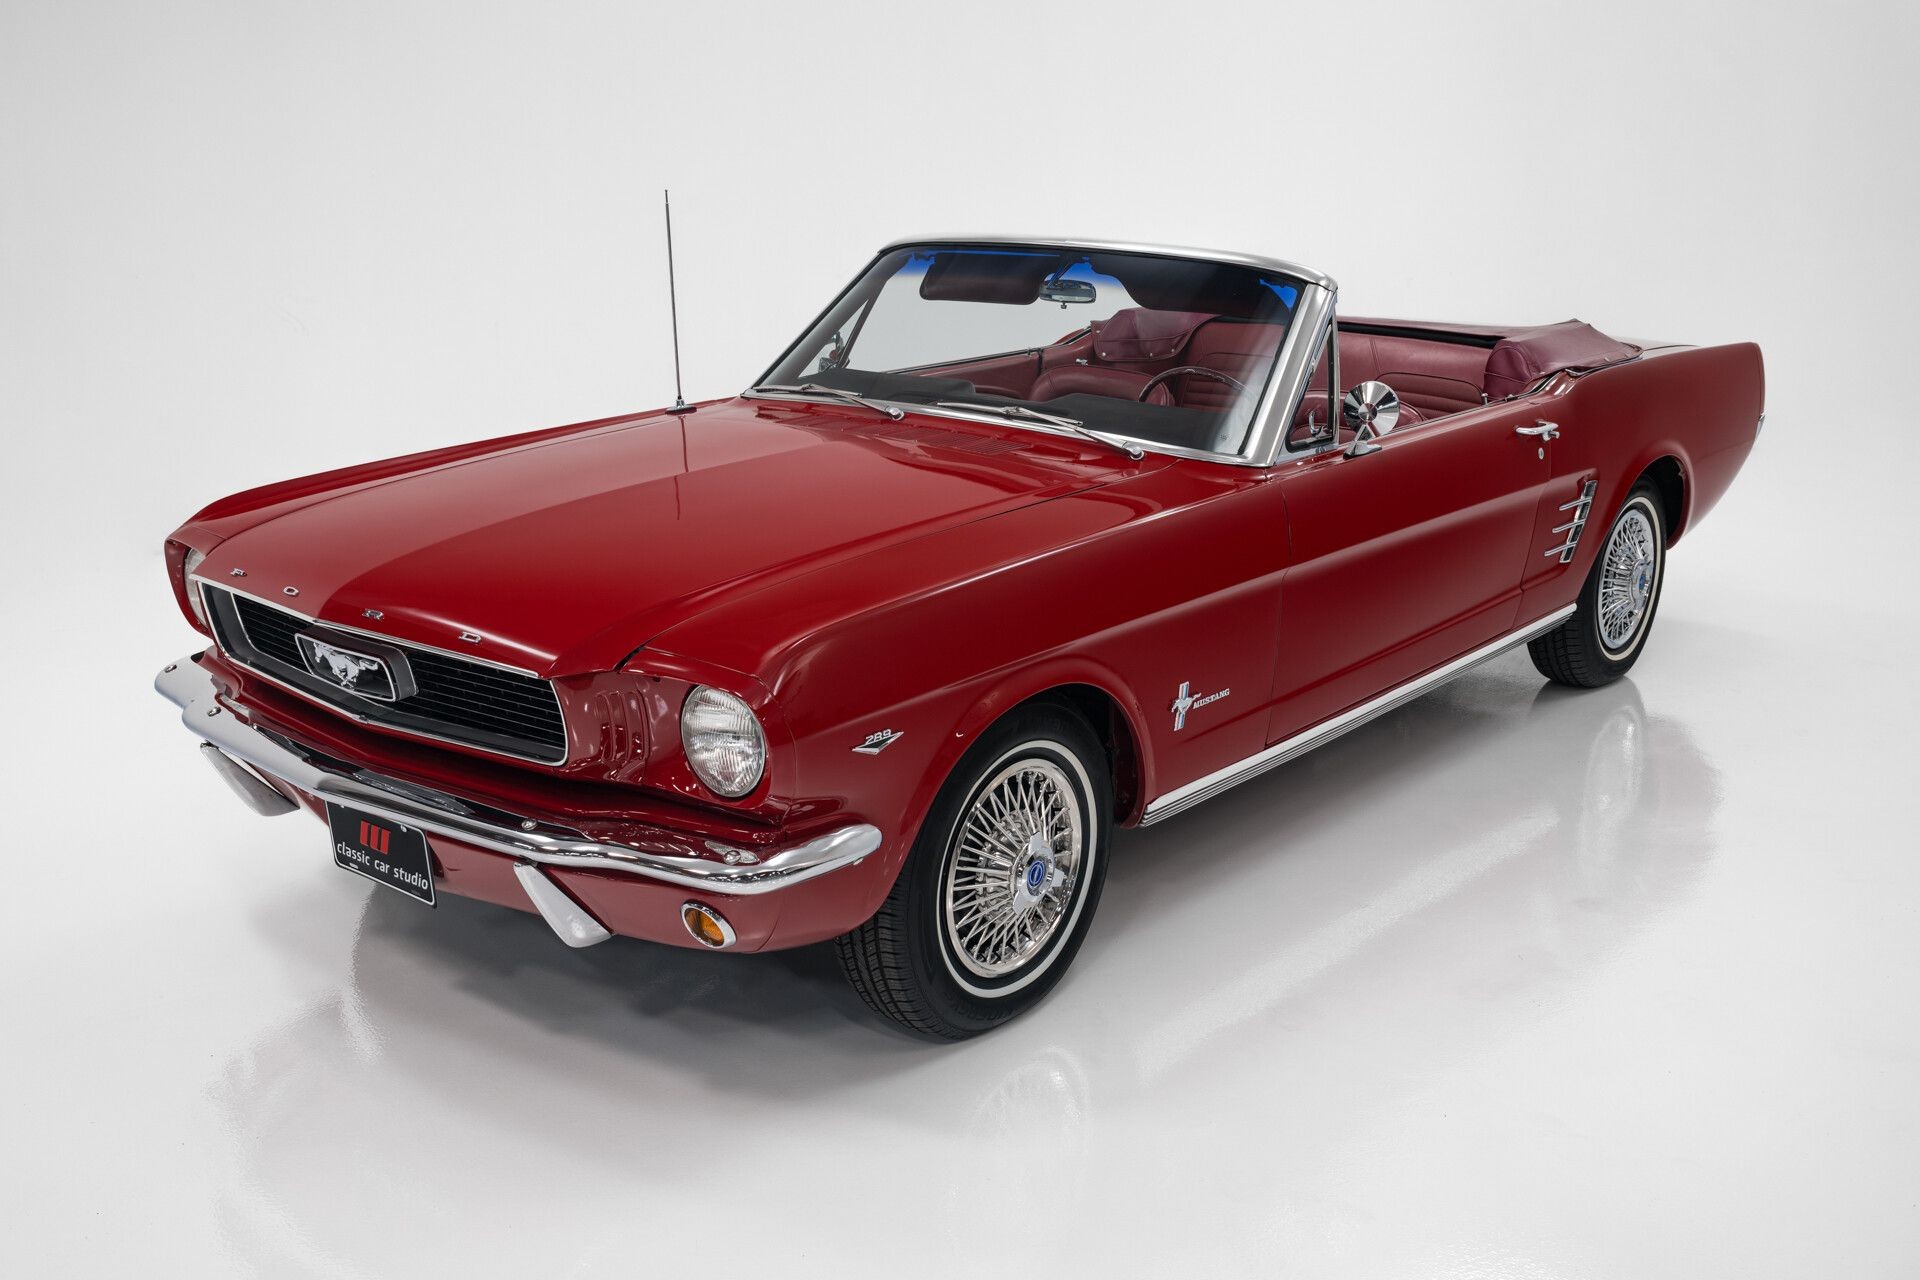 Market Snapshot: Early Mustangs from 1965 and 1966